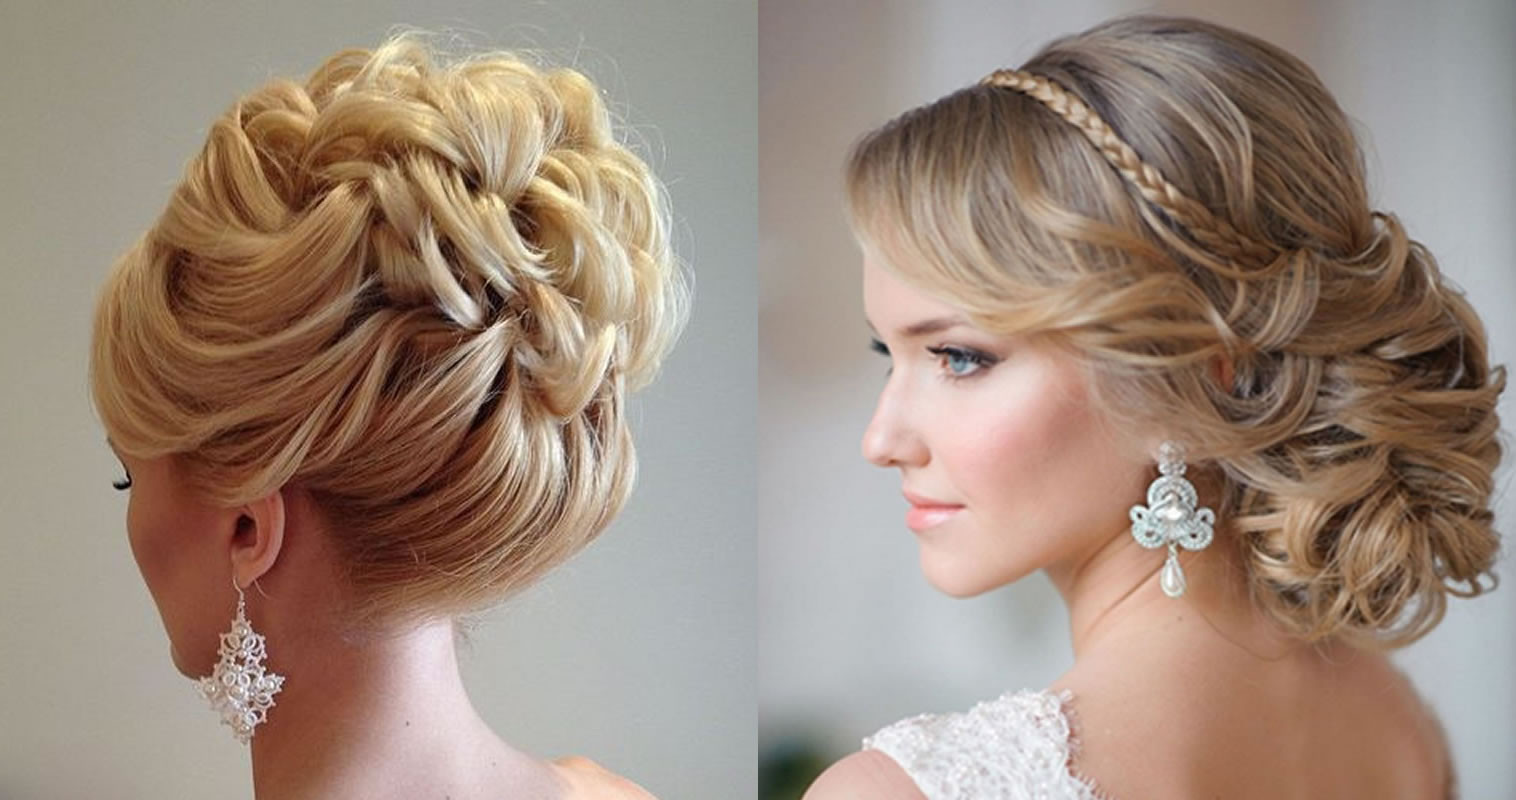 Hairstyles For Brides 2020
 Updo Wedding Hairstyles 2019 Hair Color Ideas for Bride